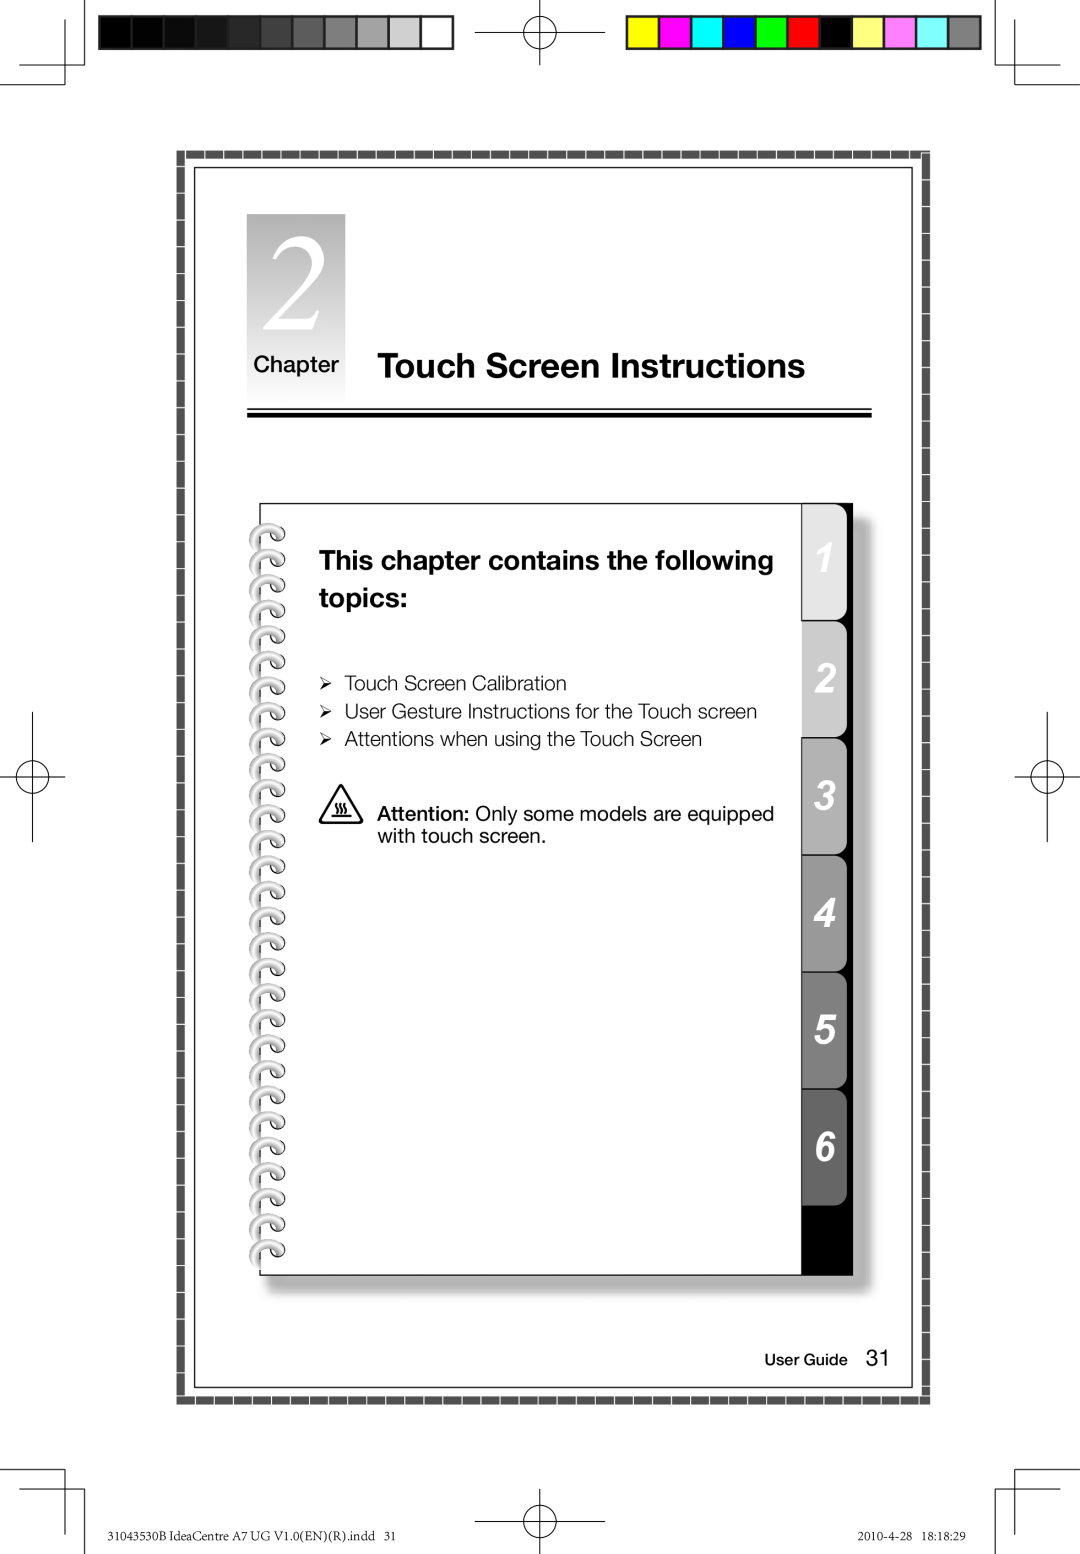 Lenovo A7 manual Chapter Touch Screen Instructions, This chapter contains the following topics, User Guide, 2010-4-28 